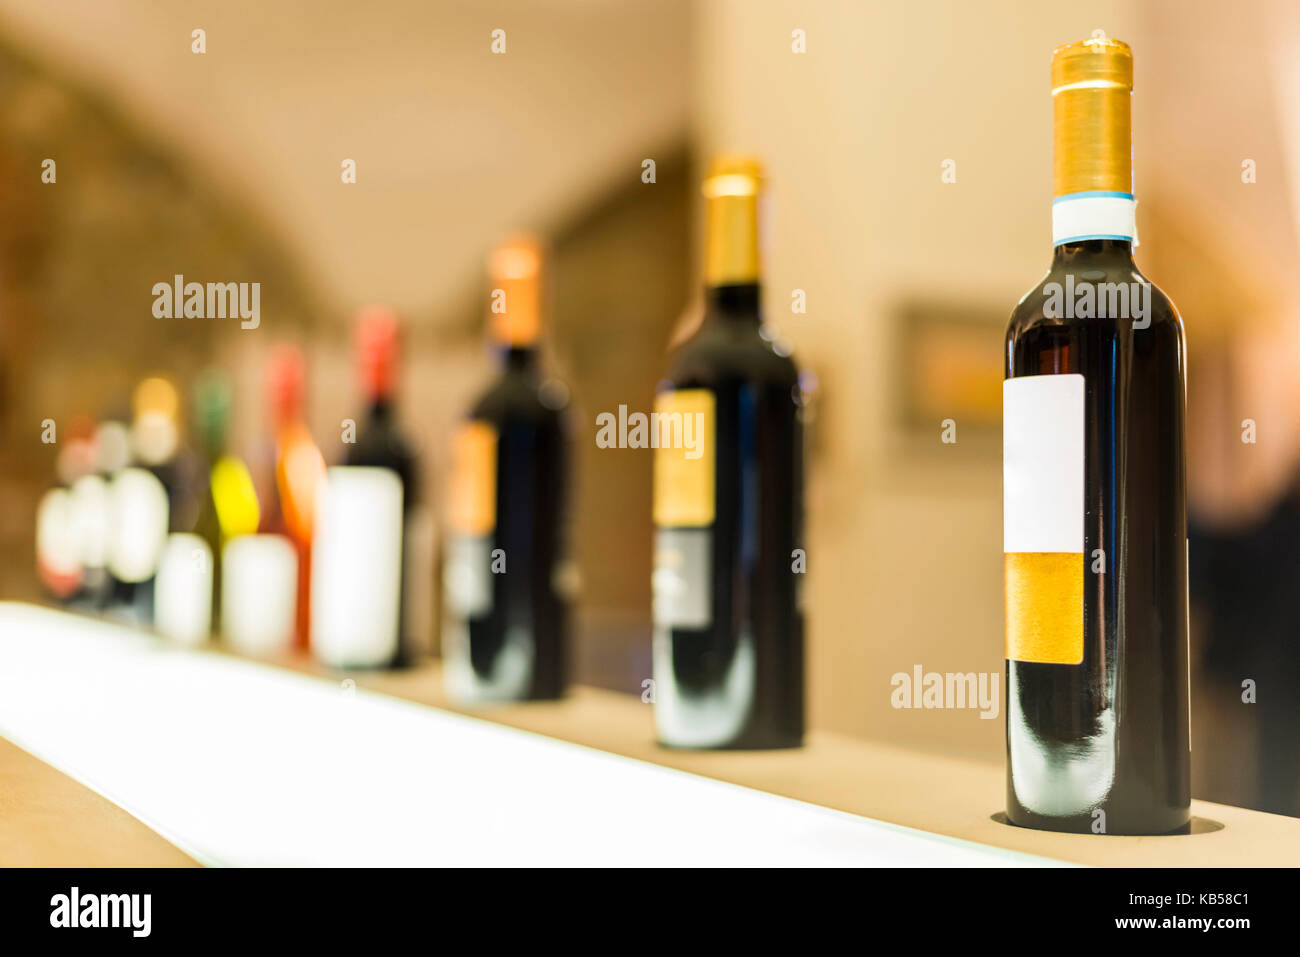 A shallow focus perspective view of a row of colorful Tuscany wine bottles on a shop shelf Stock Photo